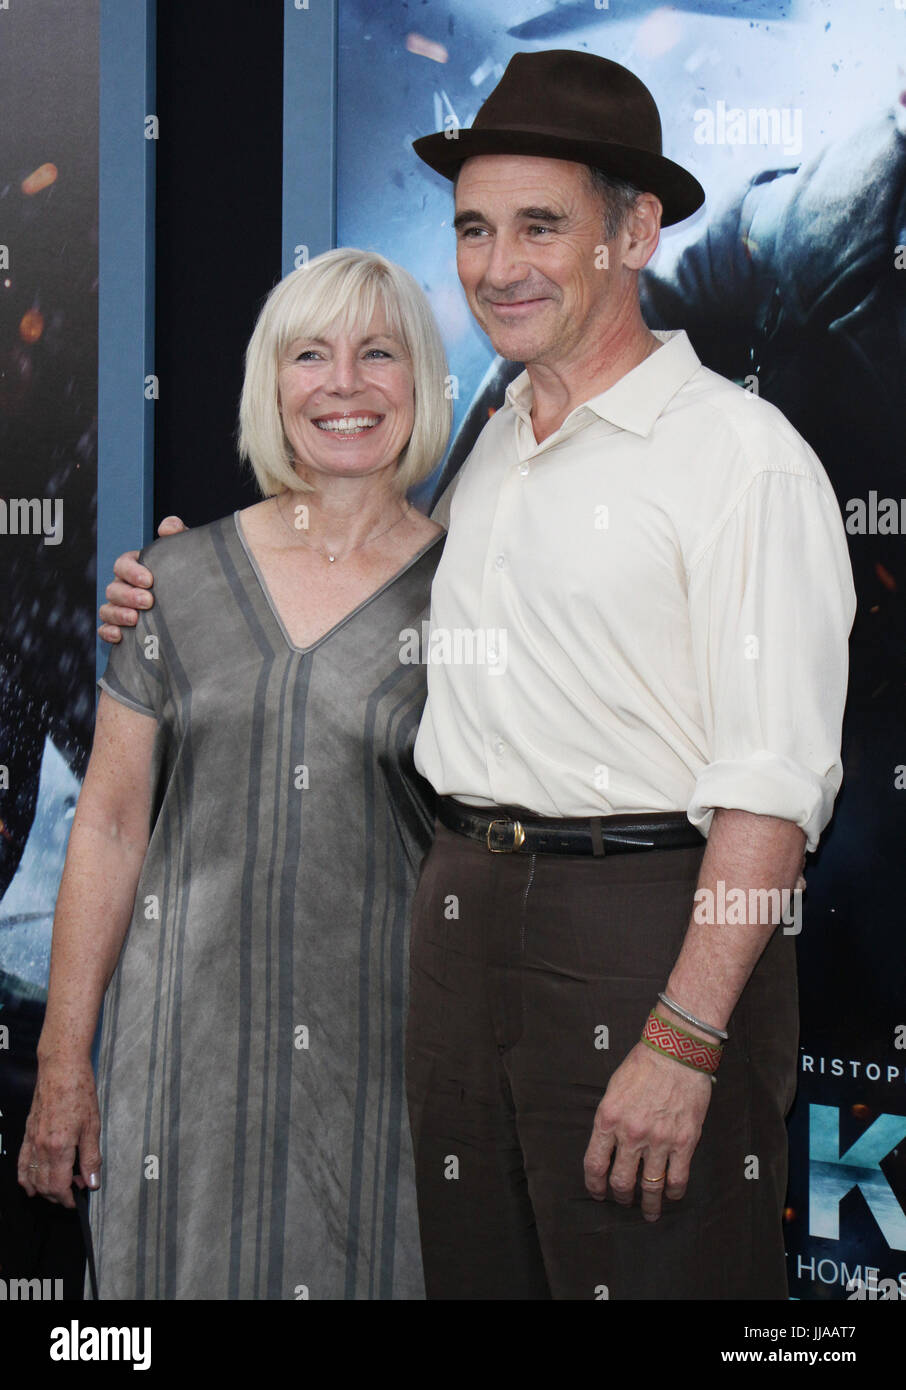 New York, USA. 18th Jul, 2017. Mark Rylance, Claire van Kampen attend Warner Bros.Pictures presents a US Premiere of Dunkirk at AMC Loews Lincoln Square 13 in New York July 18, 2017. Credit: MediaPunch Inc/Alamy Live News Stock Photo